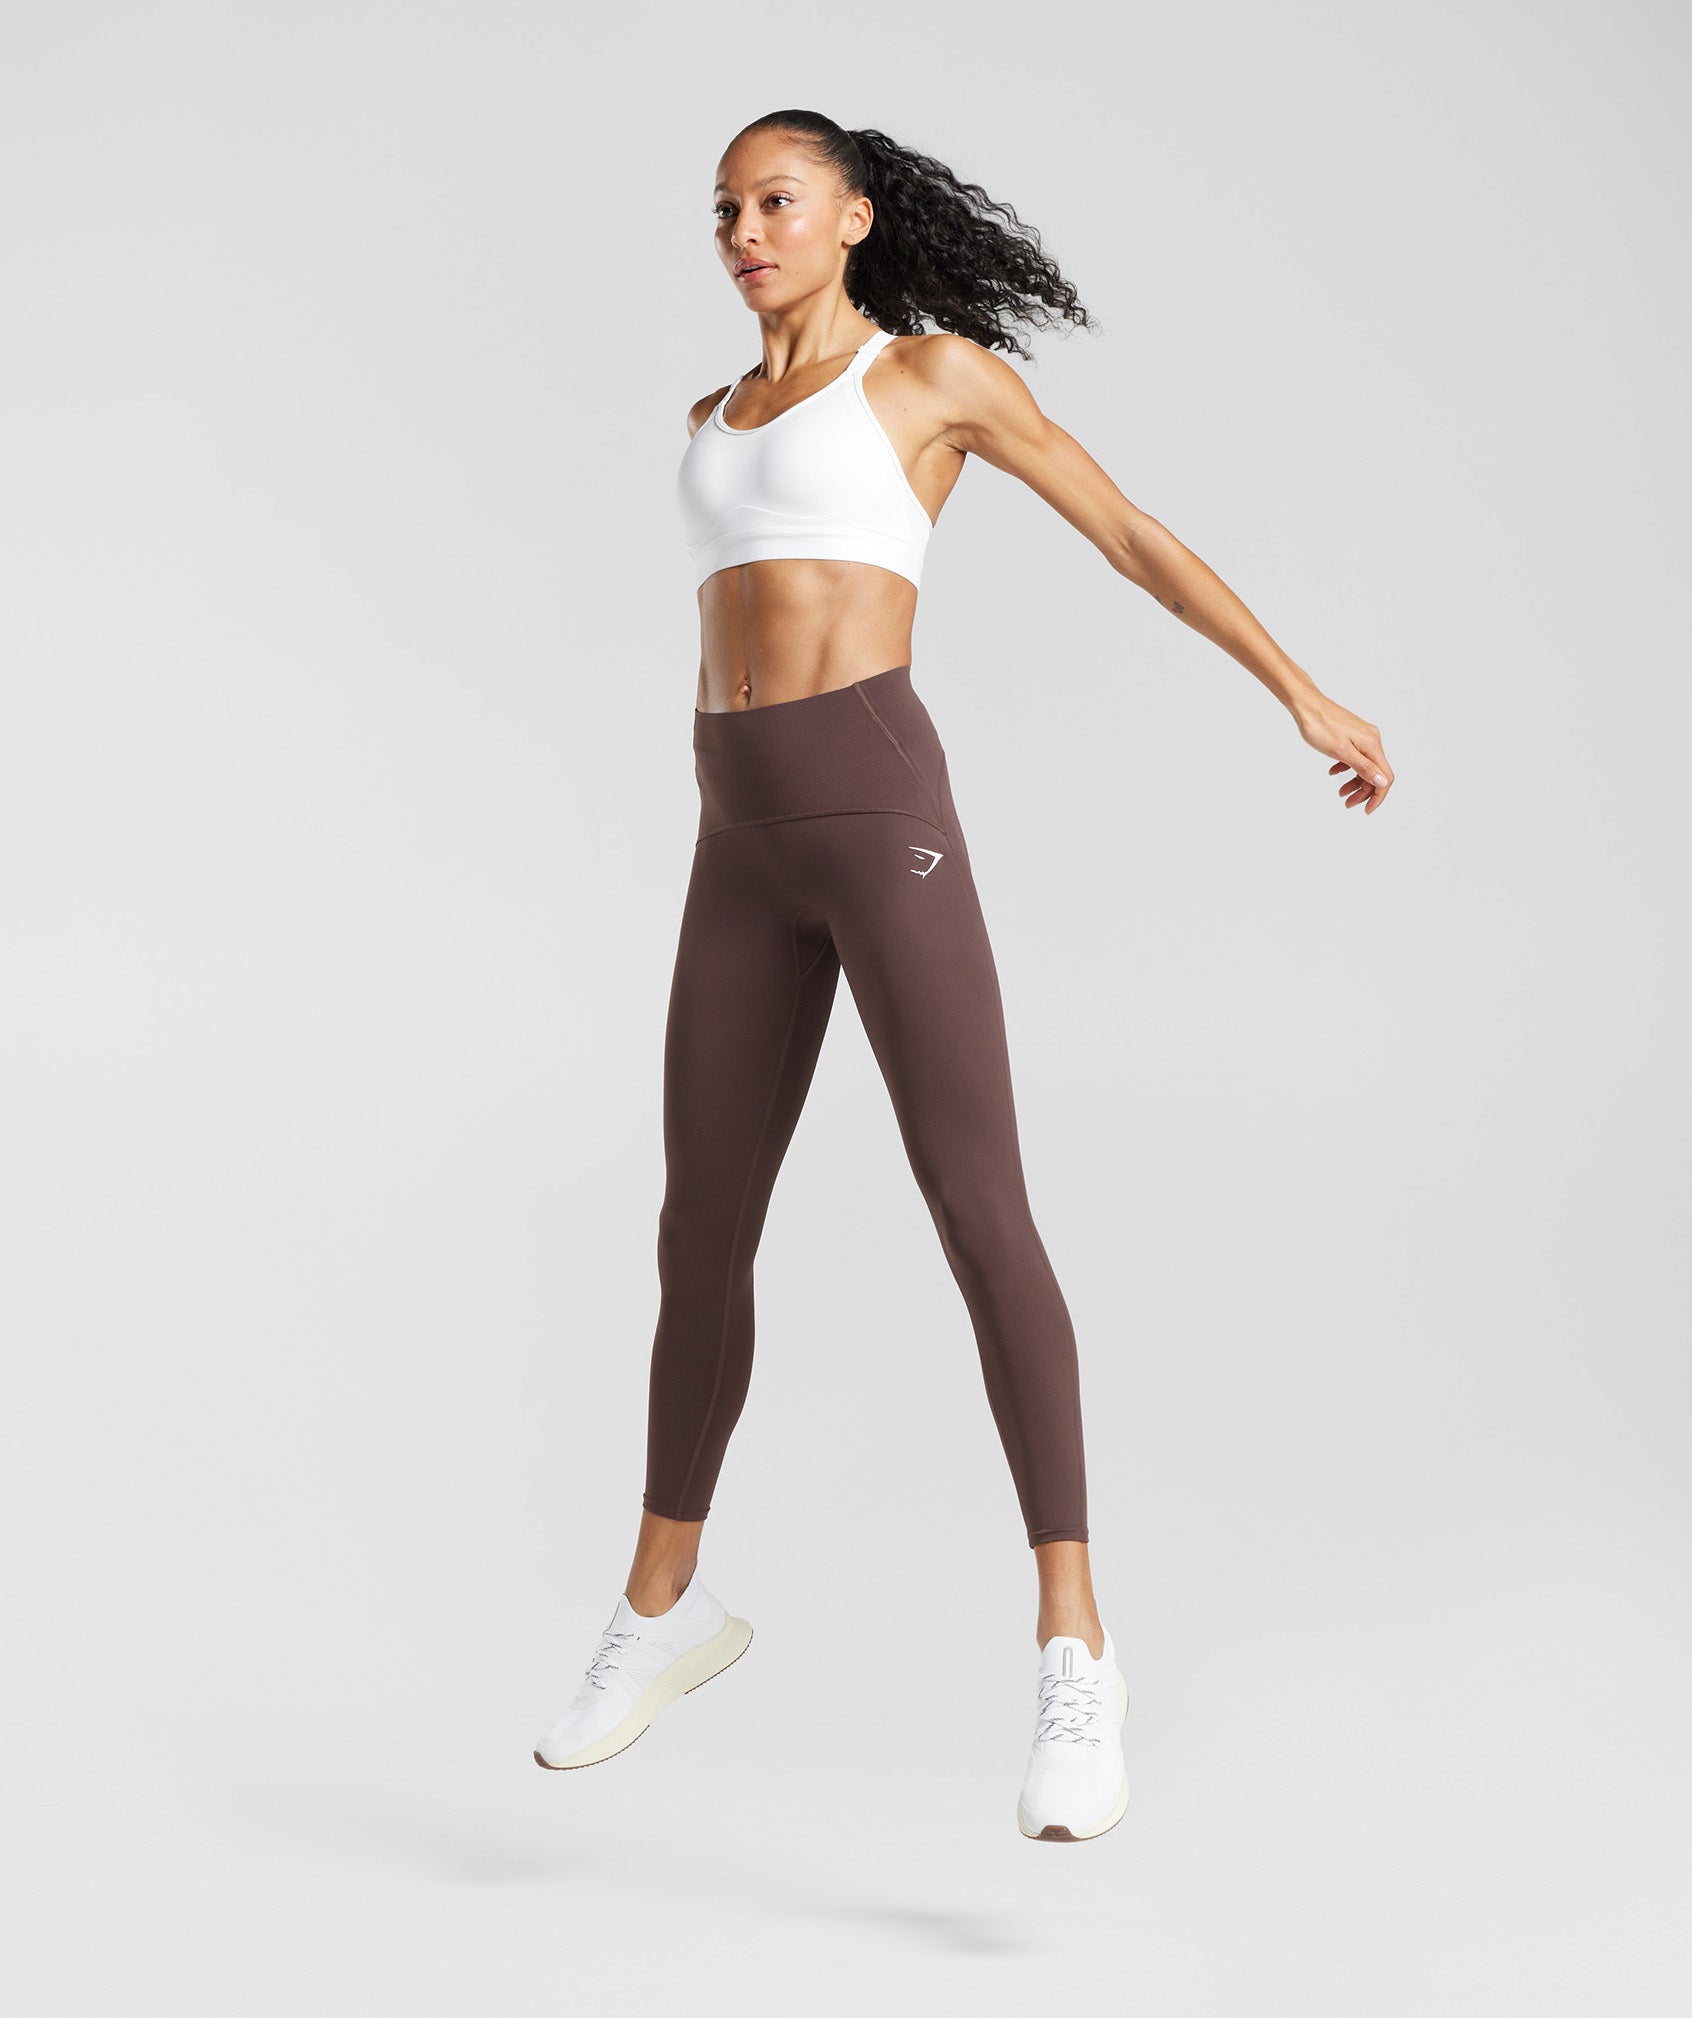 Waist Support Leggings in Chocolate Brown